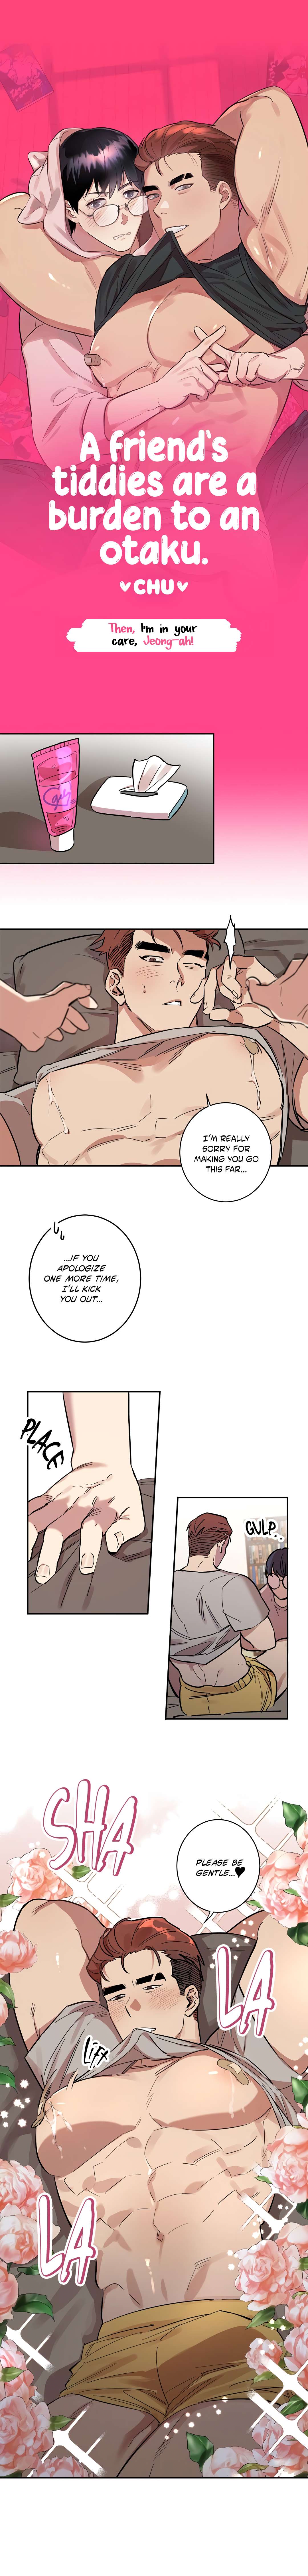 [Beefy-Boom!★ Anthology] A Friend's Tiddies Are A Burden To An Otaku - chapter 0 - #2